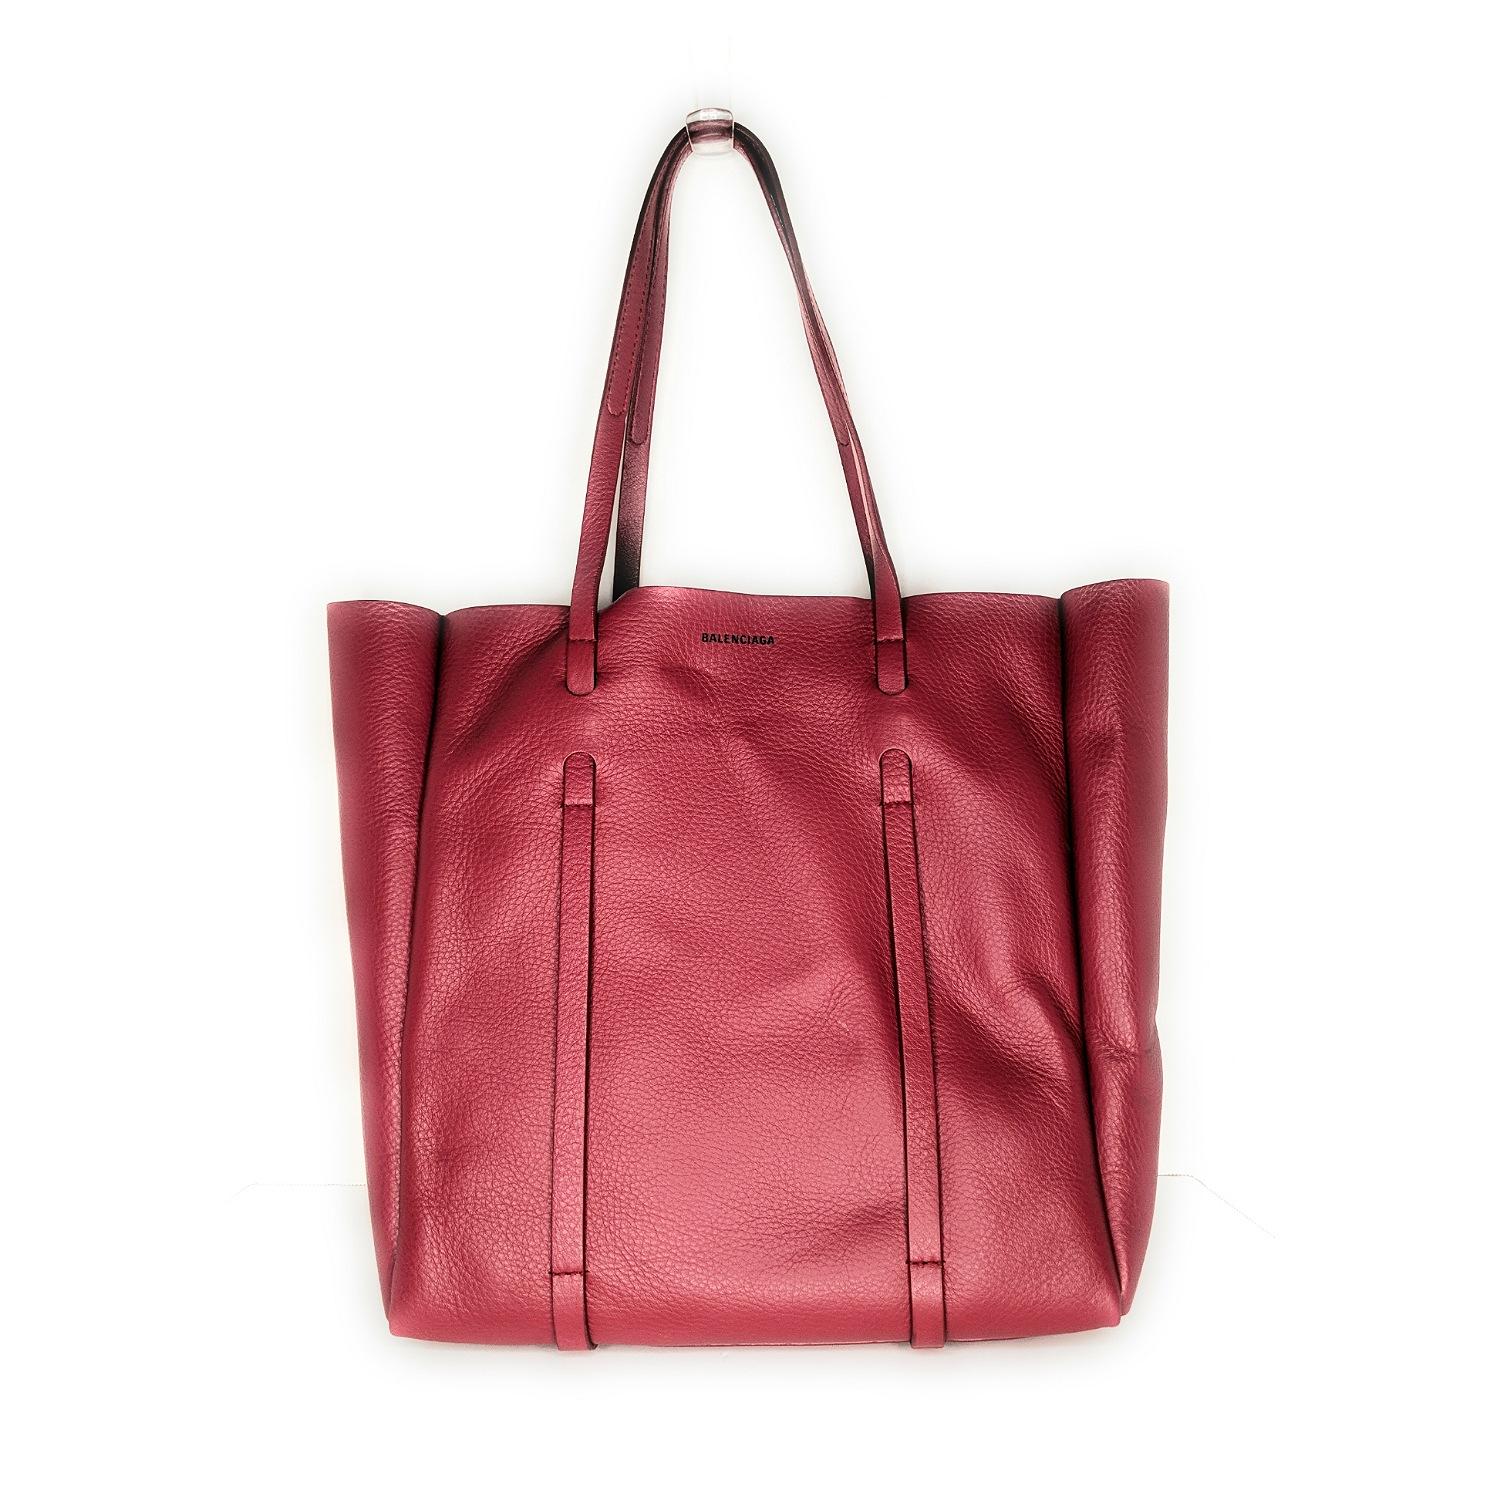 This chic tote is crafted of soft calfskin leather in Rouge. The bag features leather shoulder straps, and a wide top that is open to a smooth Black leather interior with a removable pouch. Retail price $1,185.

Designer: Balenciaga
Material: